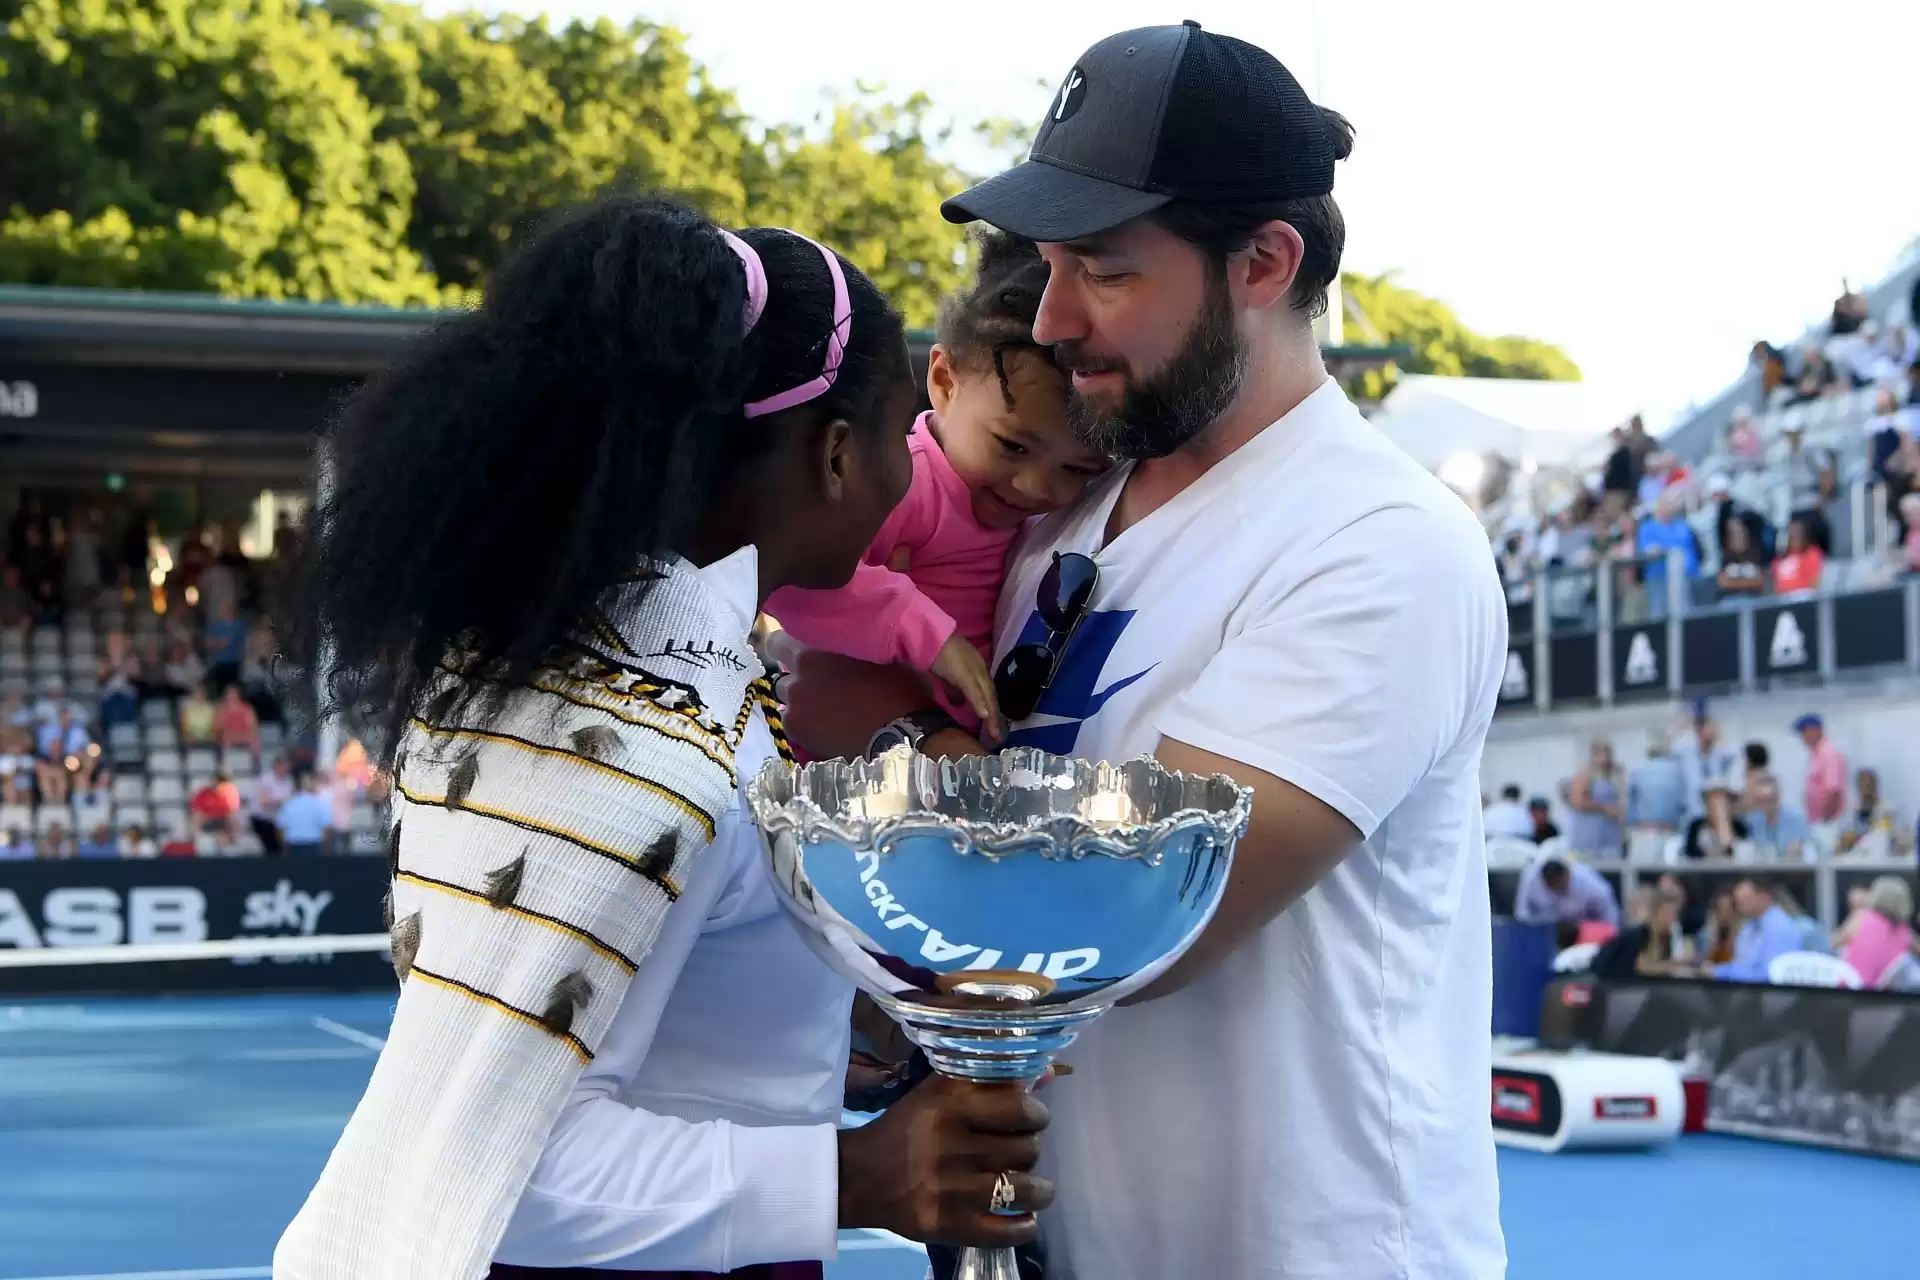 Serena Williams and Alexis Ohanian's Second Child Adira River's Photoshoot: Tennis Fans React with "Pure Love and Adoration"